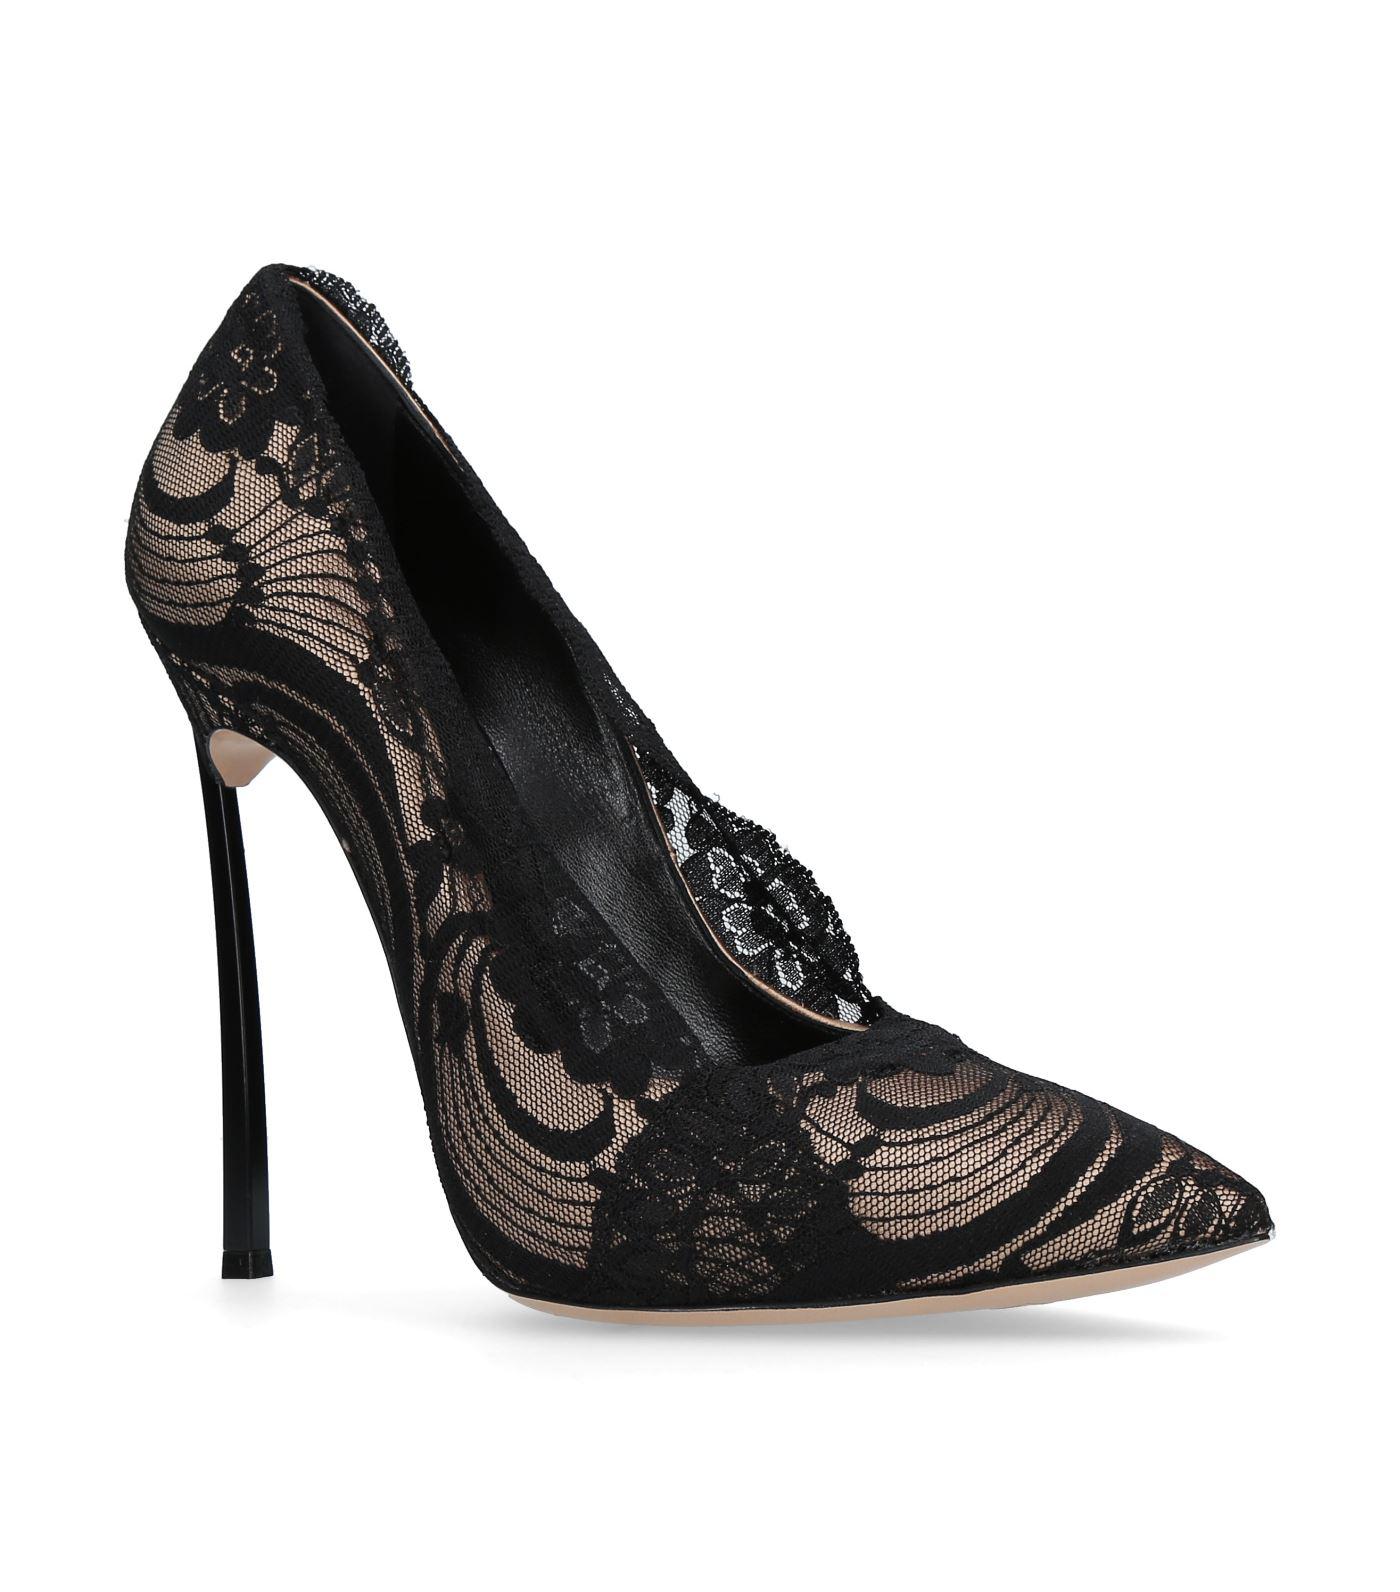 Casadei Blade Lace Pumps in Black - Lyst